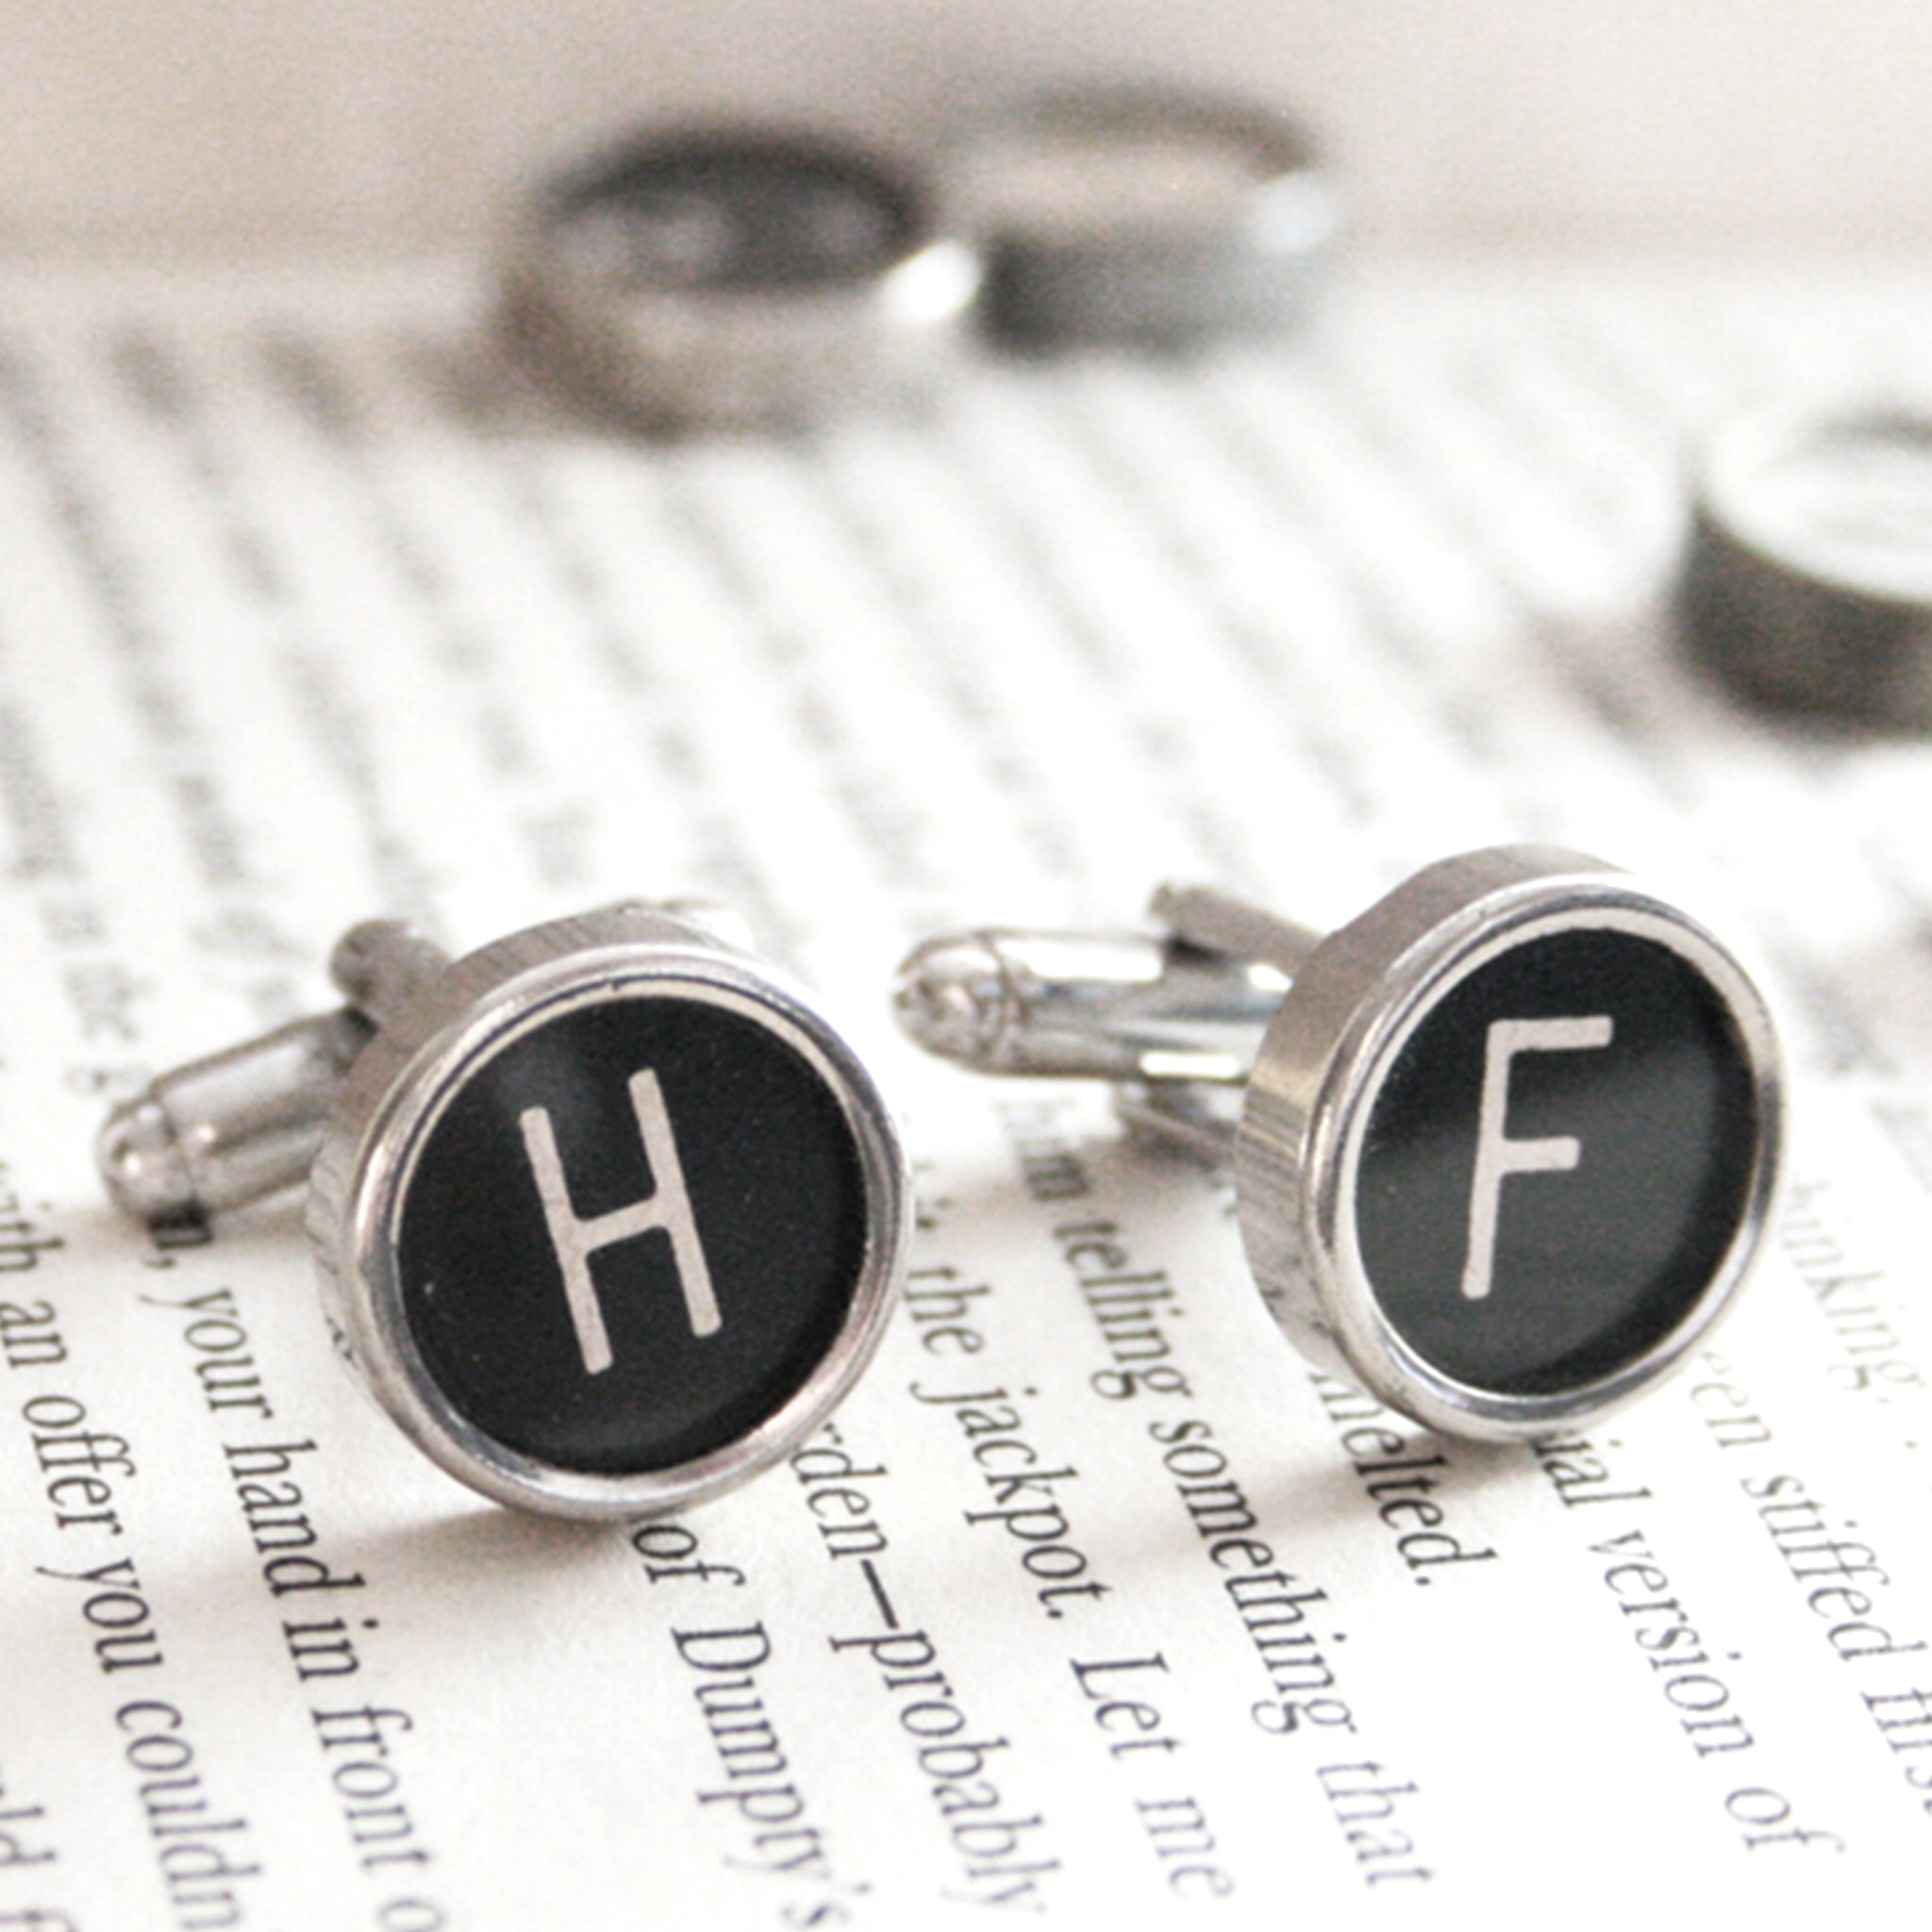 Black Personalised cufflinks with initials made of real typewriter keys H and F